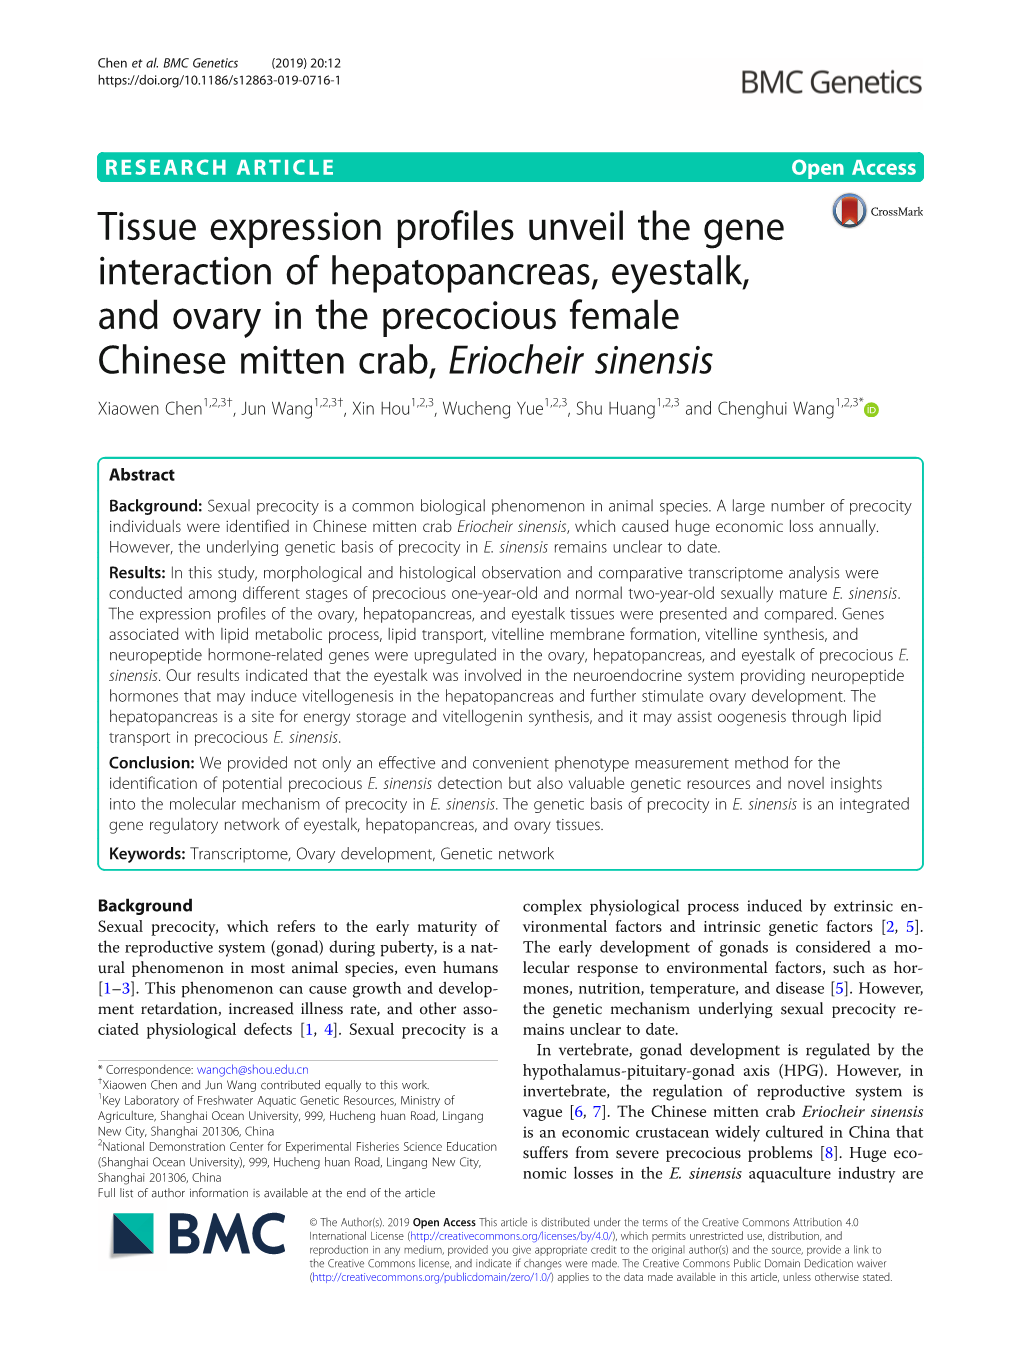 Tissue Expression Profiles Unveil the Gene Interaction of Hepatopancreas